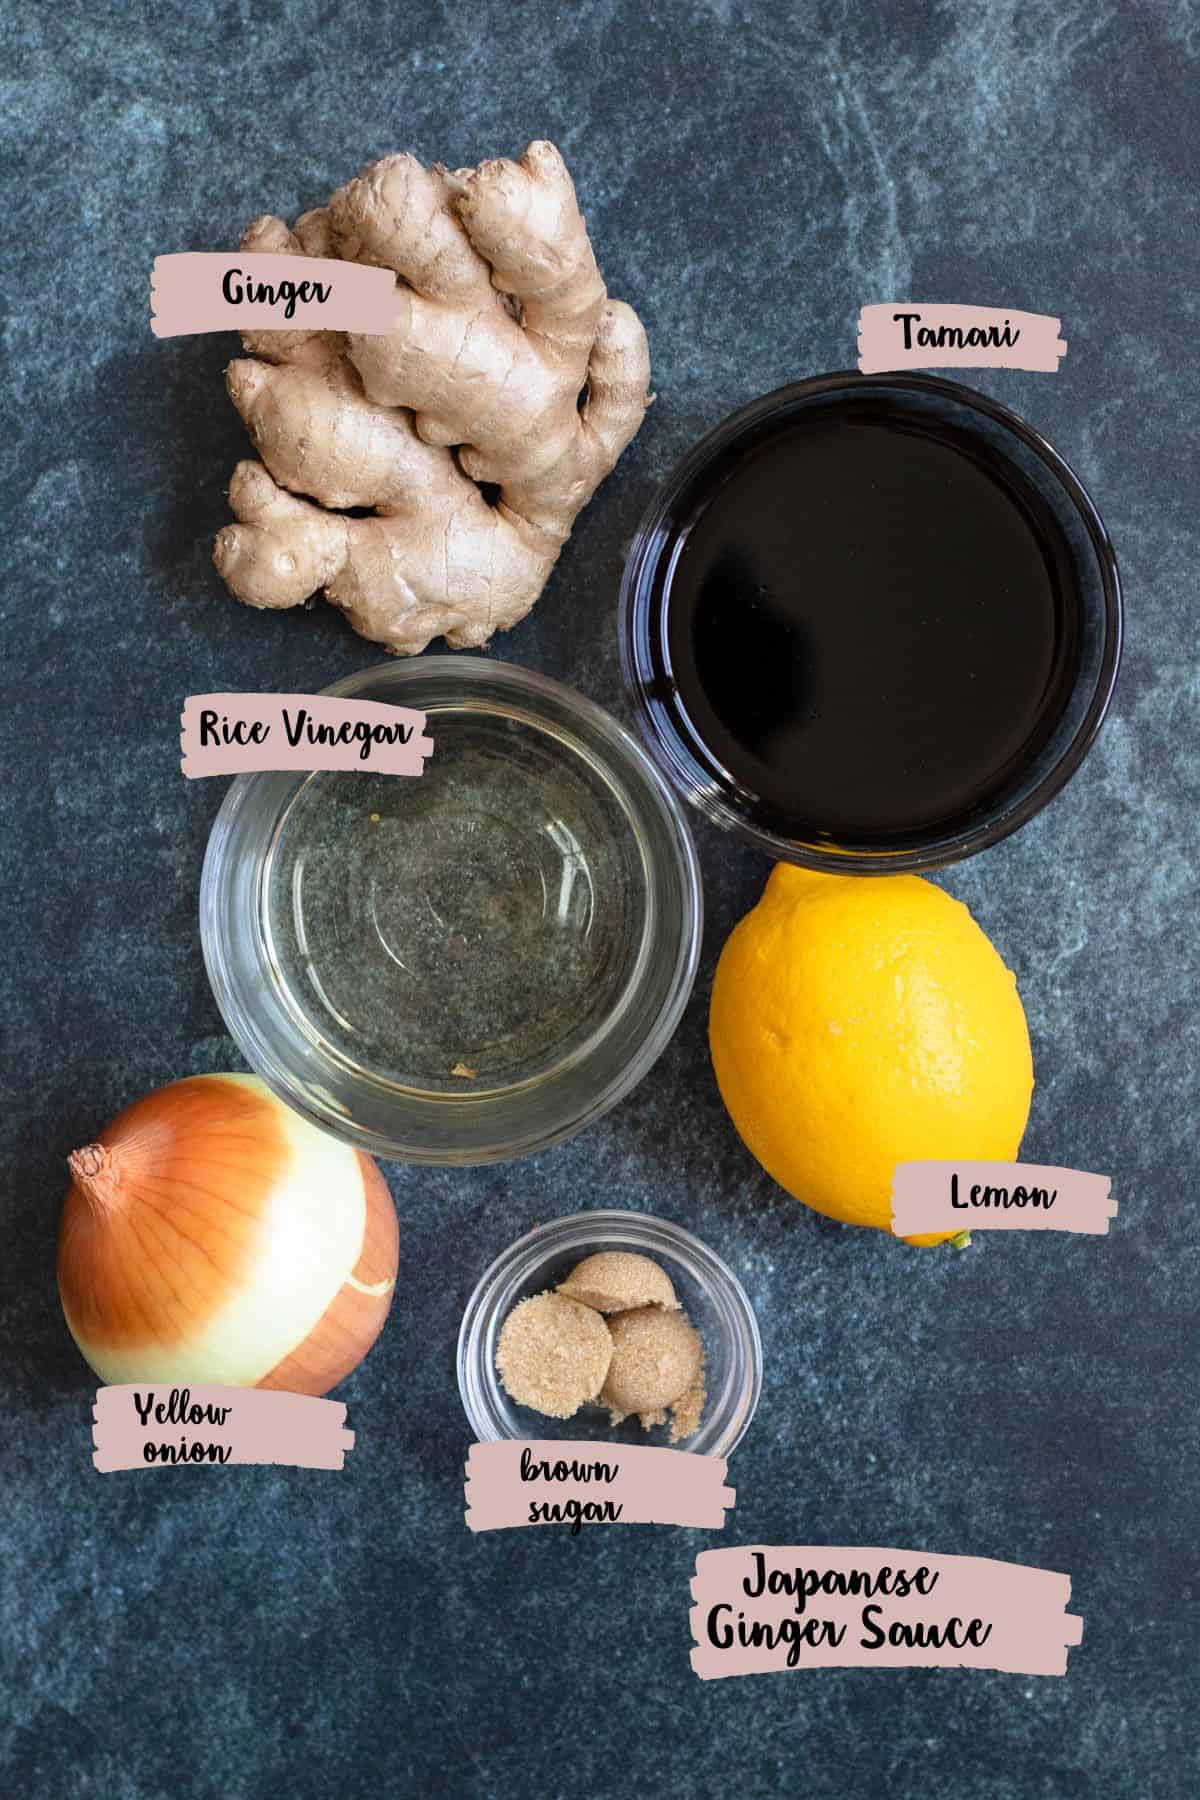 Ingredients shown are used to prepare a Japanese Ginger sauce recipe. 